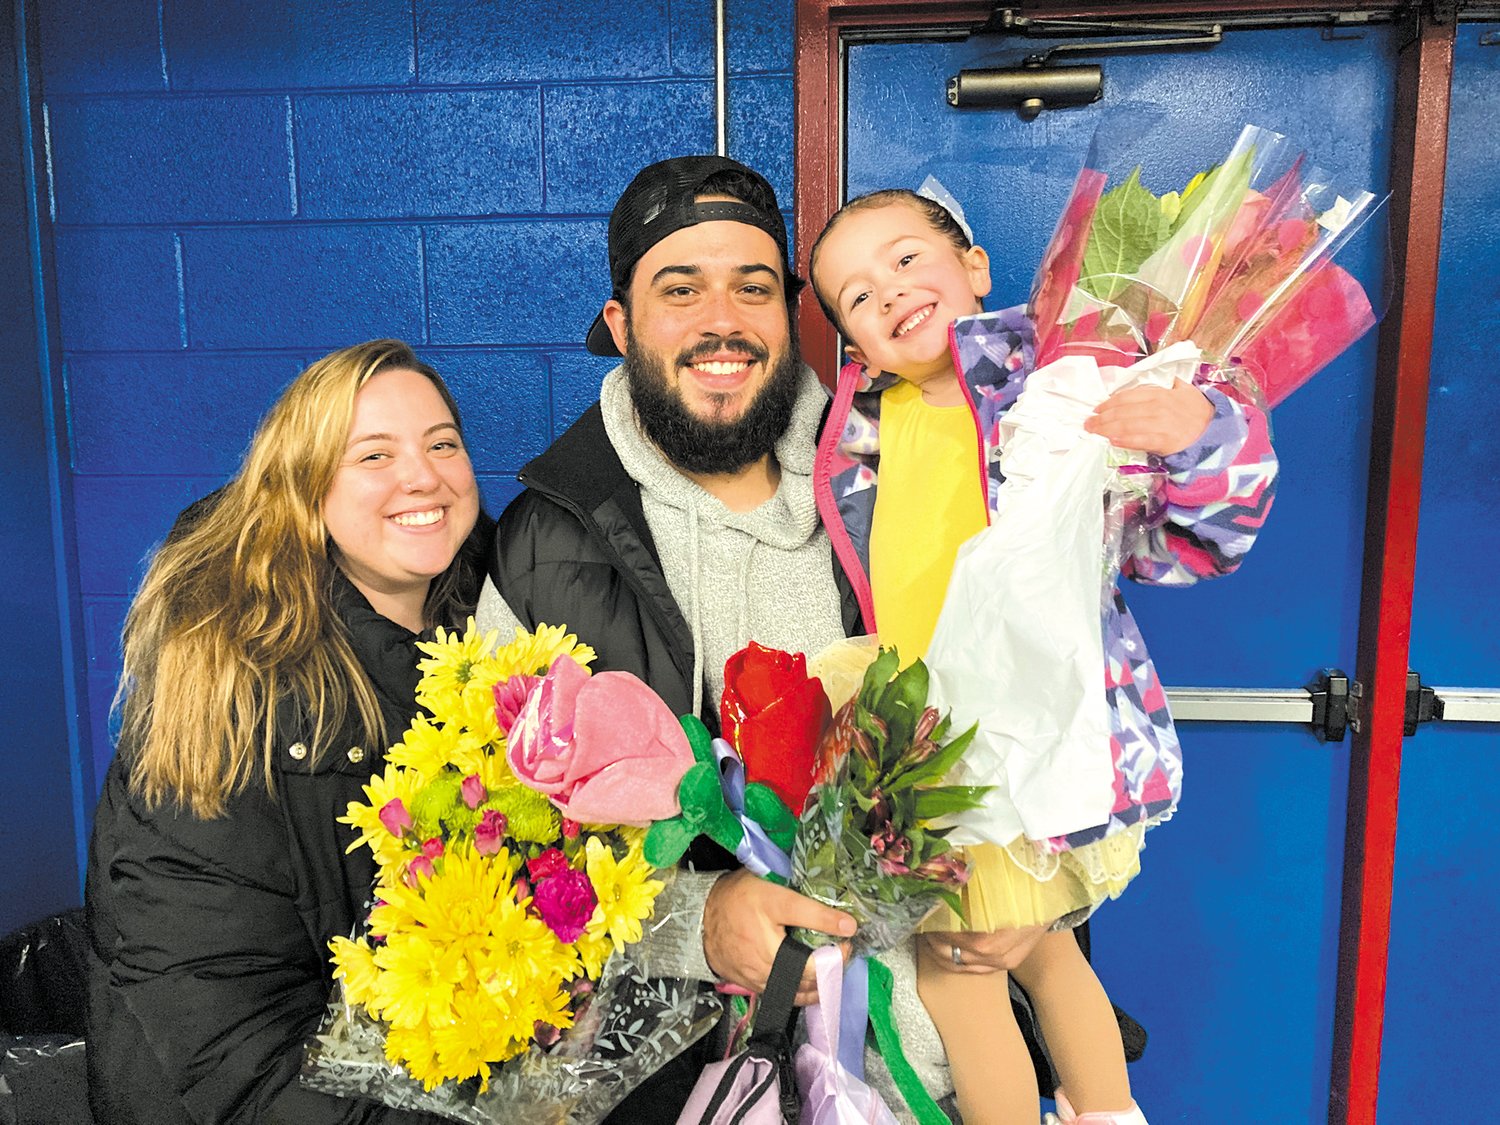 BEAUTIFUL BOUQUET: Four year old Kiara Conway is showered with flowers for her group performance Cover Me in Sunshine. Here she happily poses with her mom,Courtney, and dad Geoff. This was her first year skating and her mom says she loves it. They live in Warwick and Kiara is in preschool at St. Peter’s.